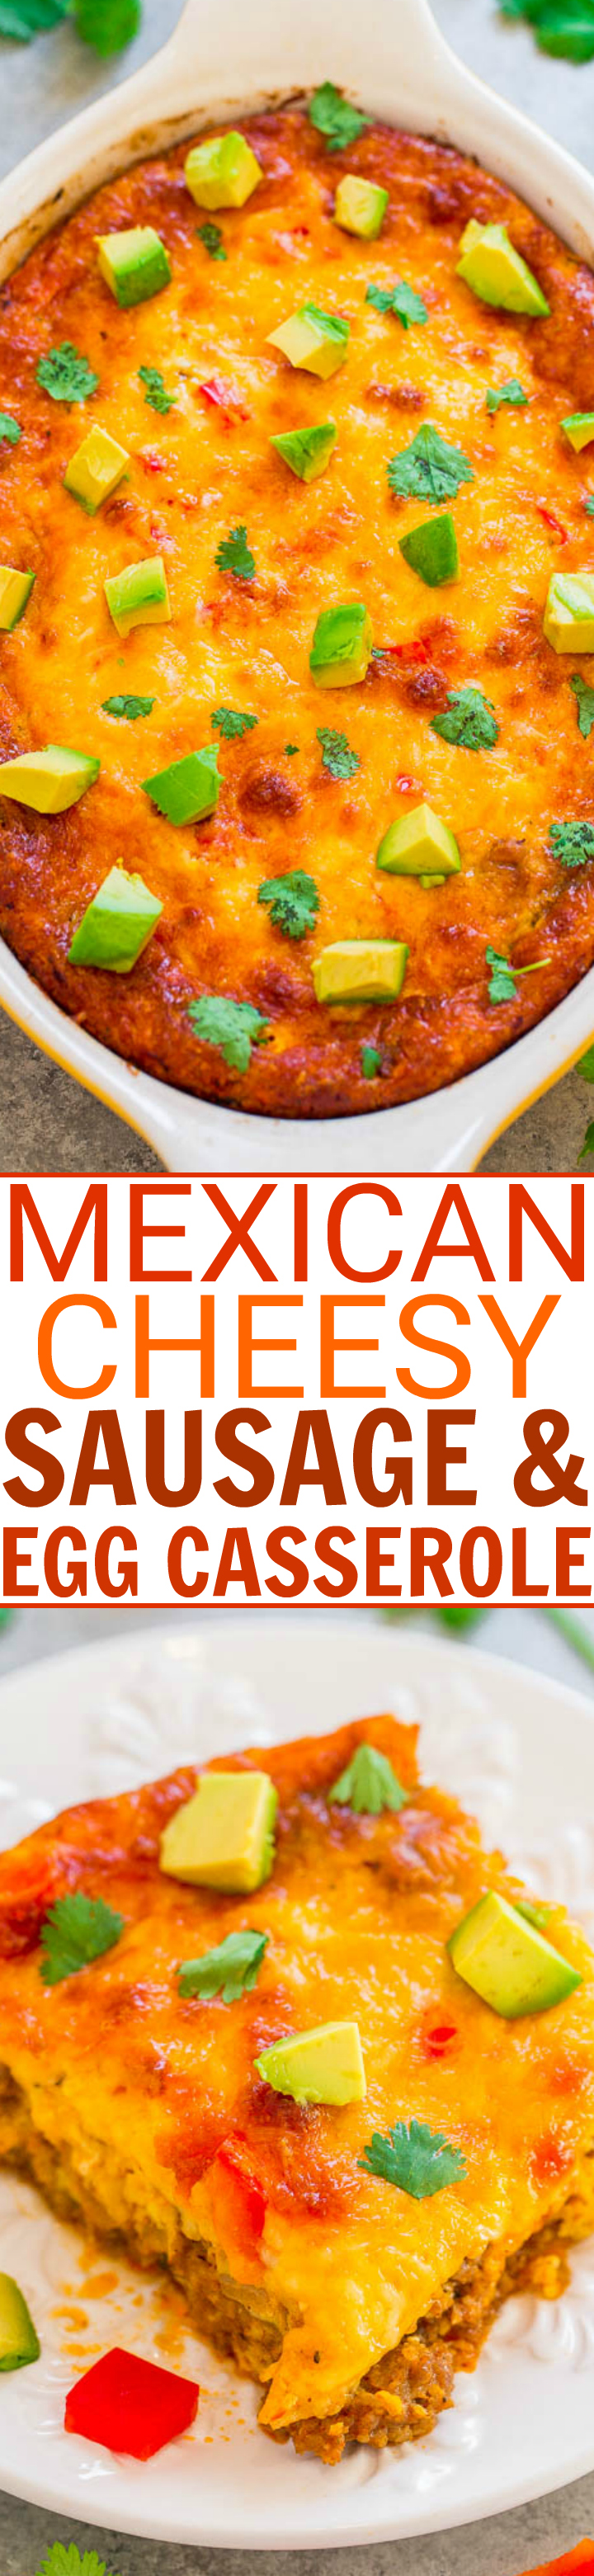 Mexican Cheesy Sausage and Egg Casserole - EASY, hearty, loaded with sausage, tons of CHEESE, and topped with avocado!! This is a family favorite that's perfect for breakfast, brunch, or breakfast-for-dinner!!